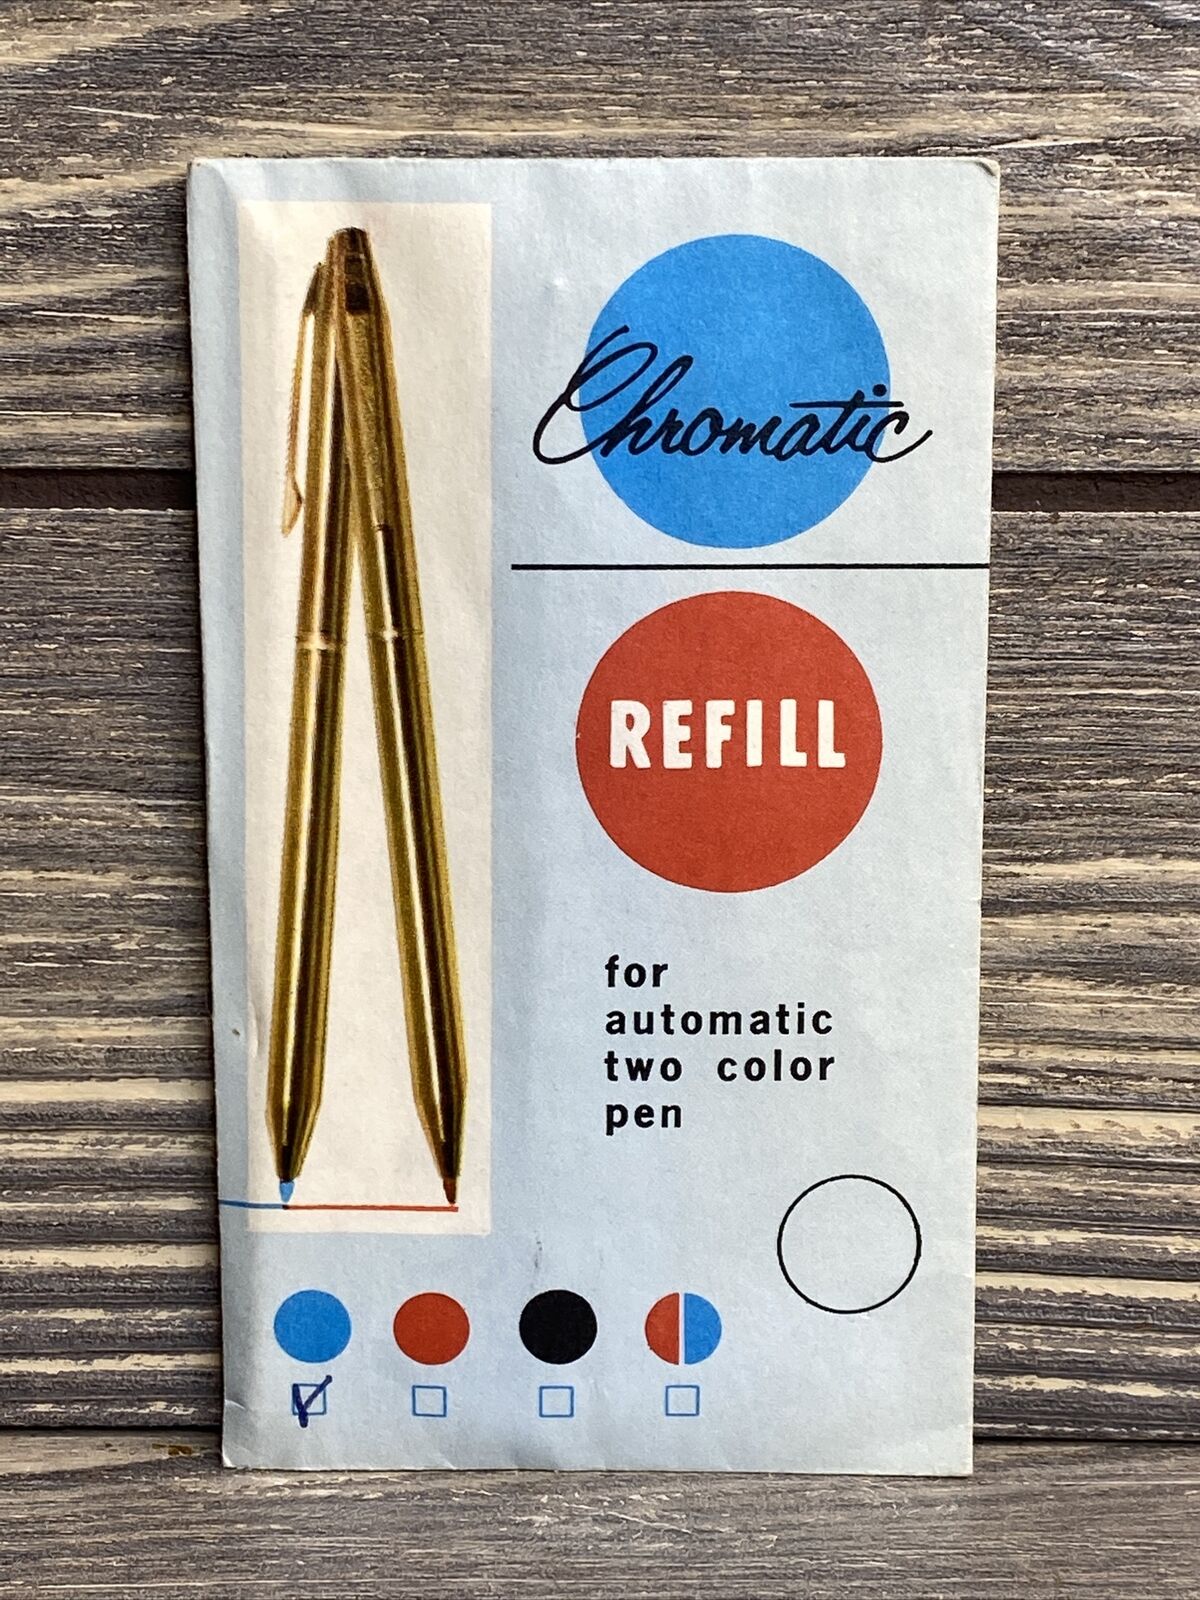 Vintage Chromatic Refill For Automatic Rwo Color Pen Blue Ink A2